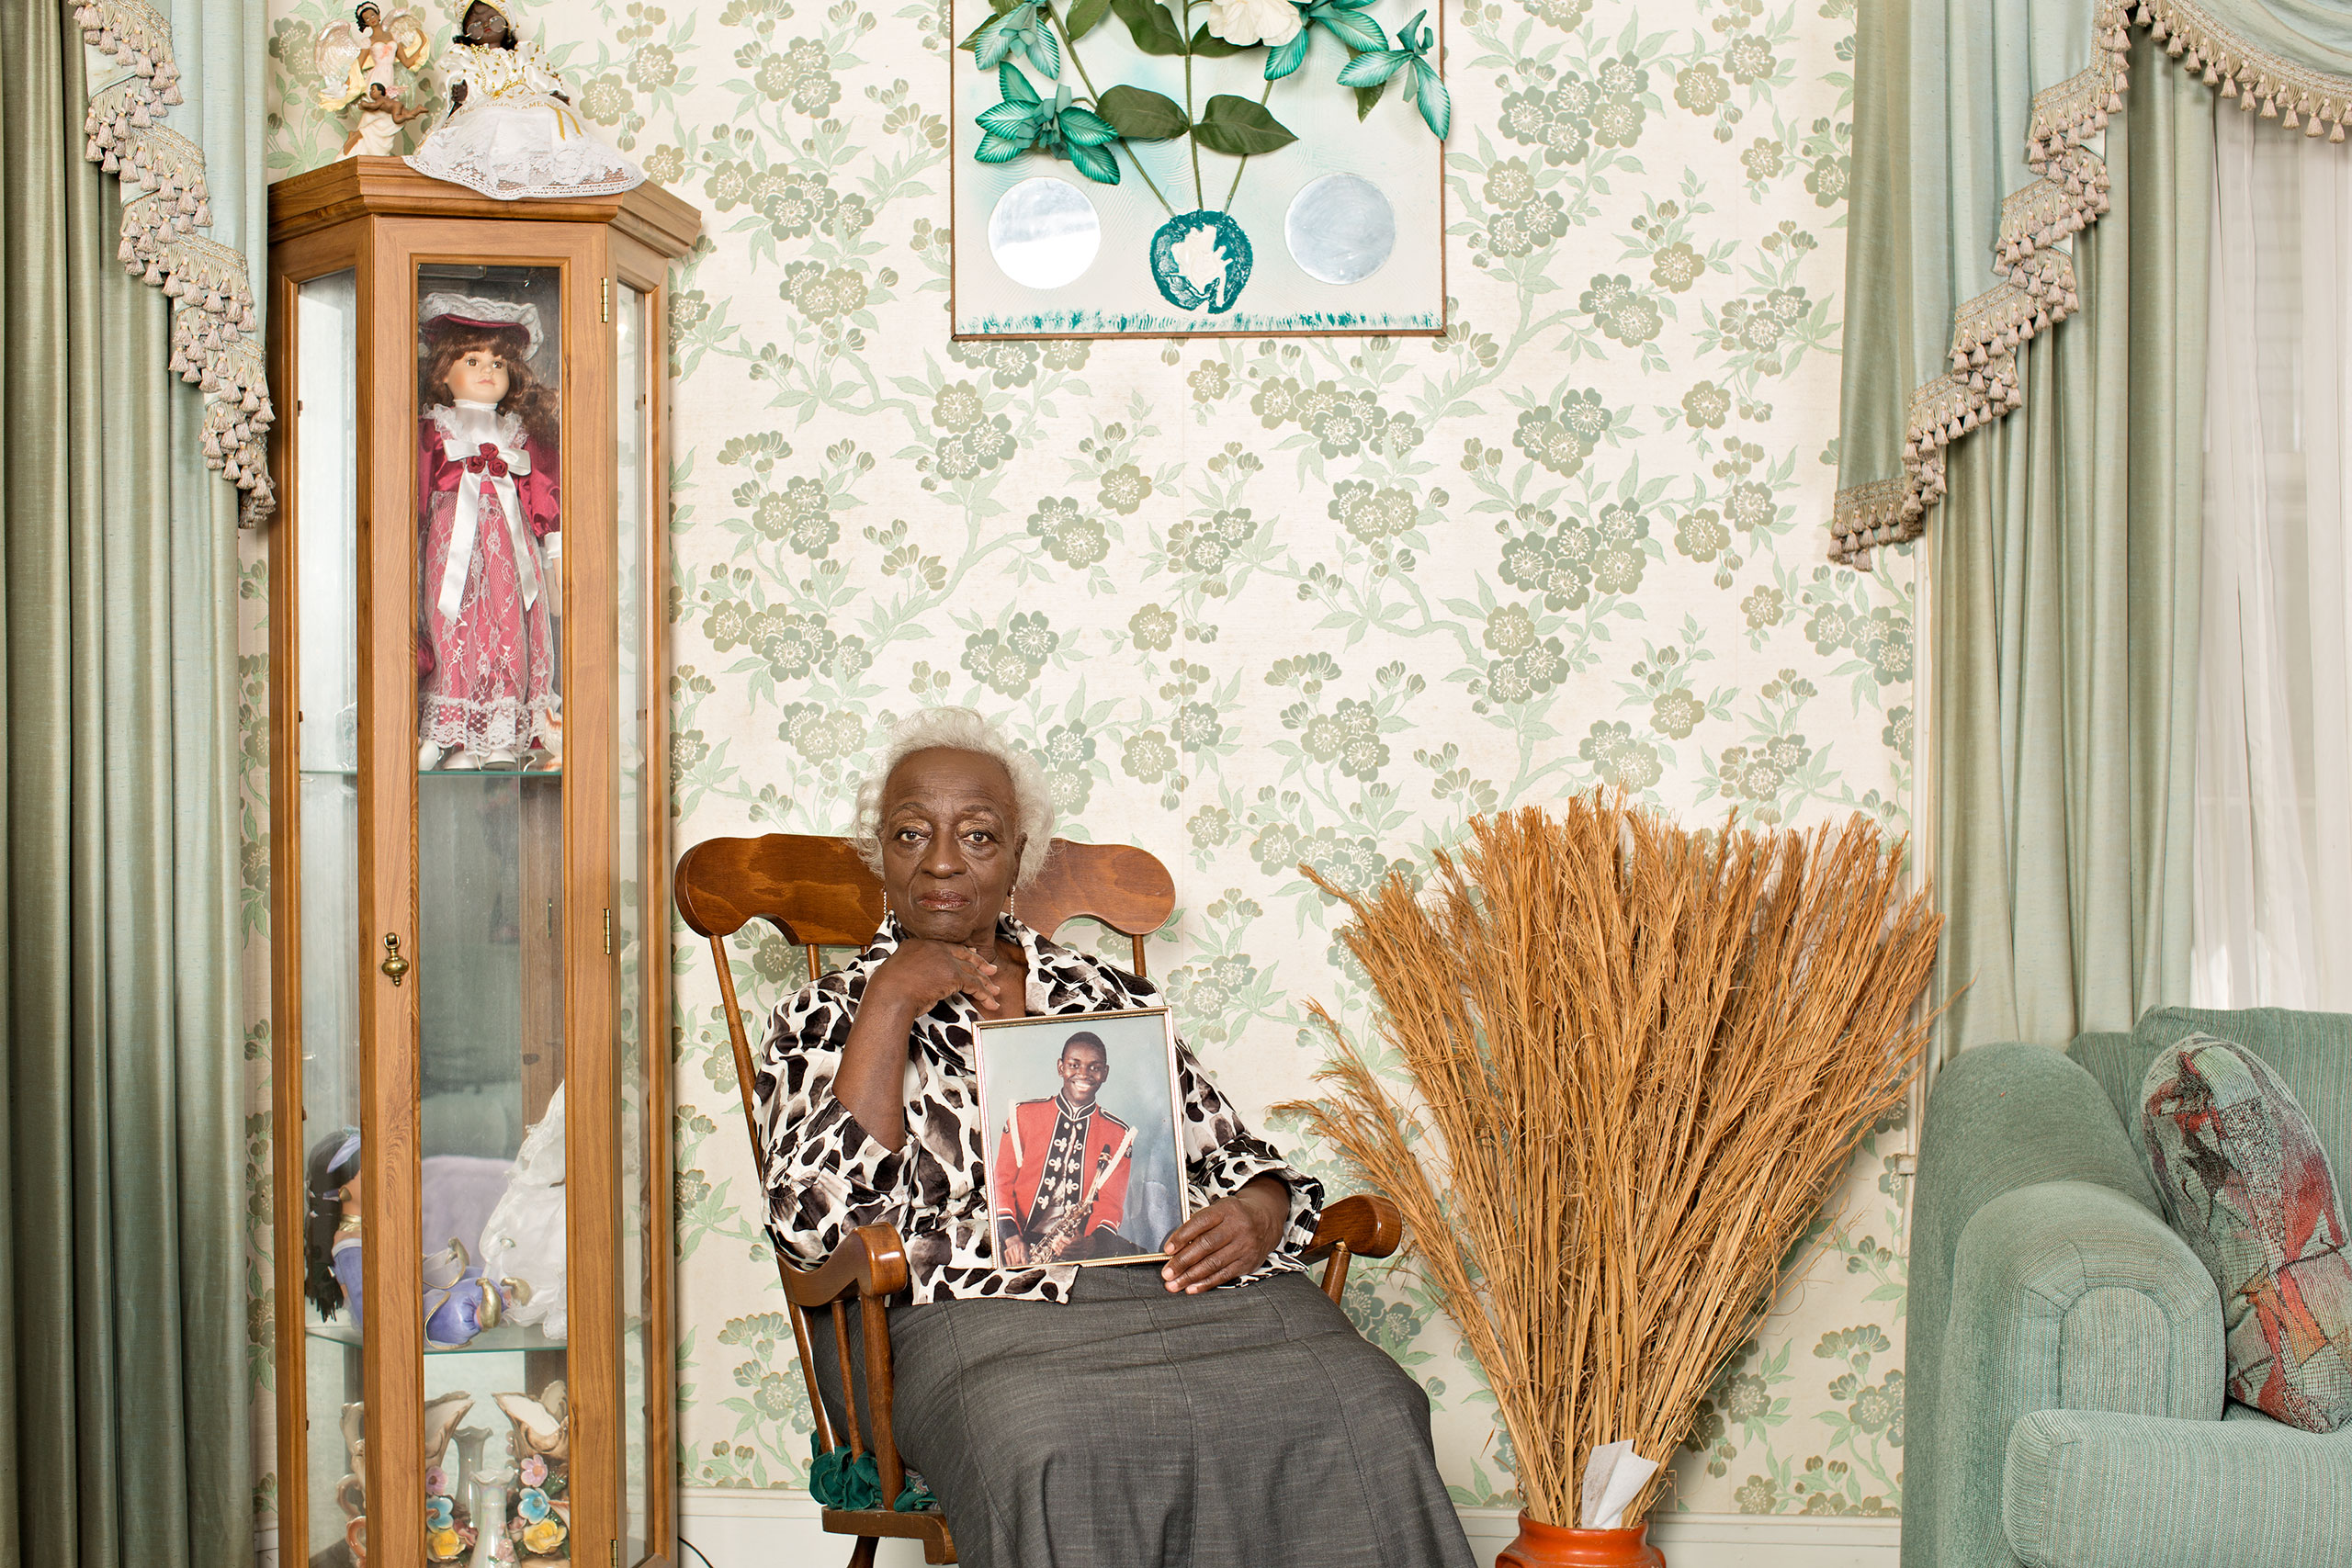 Gracie Broome, the Rev. Clementa Pinckney’s grandmother, at her home in Mullins, S.C., with a photo of him in his school marching-band uniform. “When you hear others forgiving,” she says, “it makes you feel good.”From  Telling Charleston’s Story in Photographs